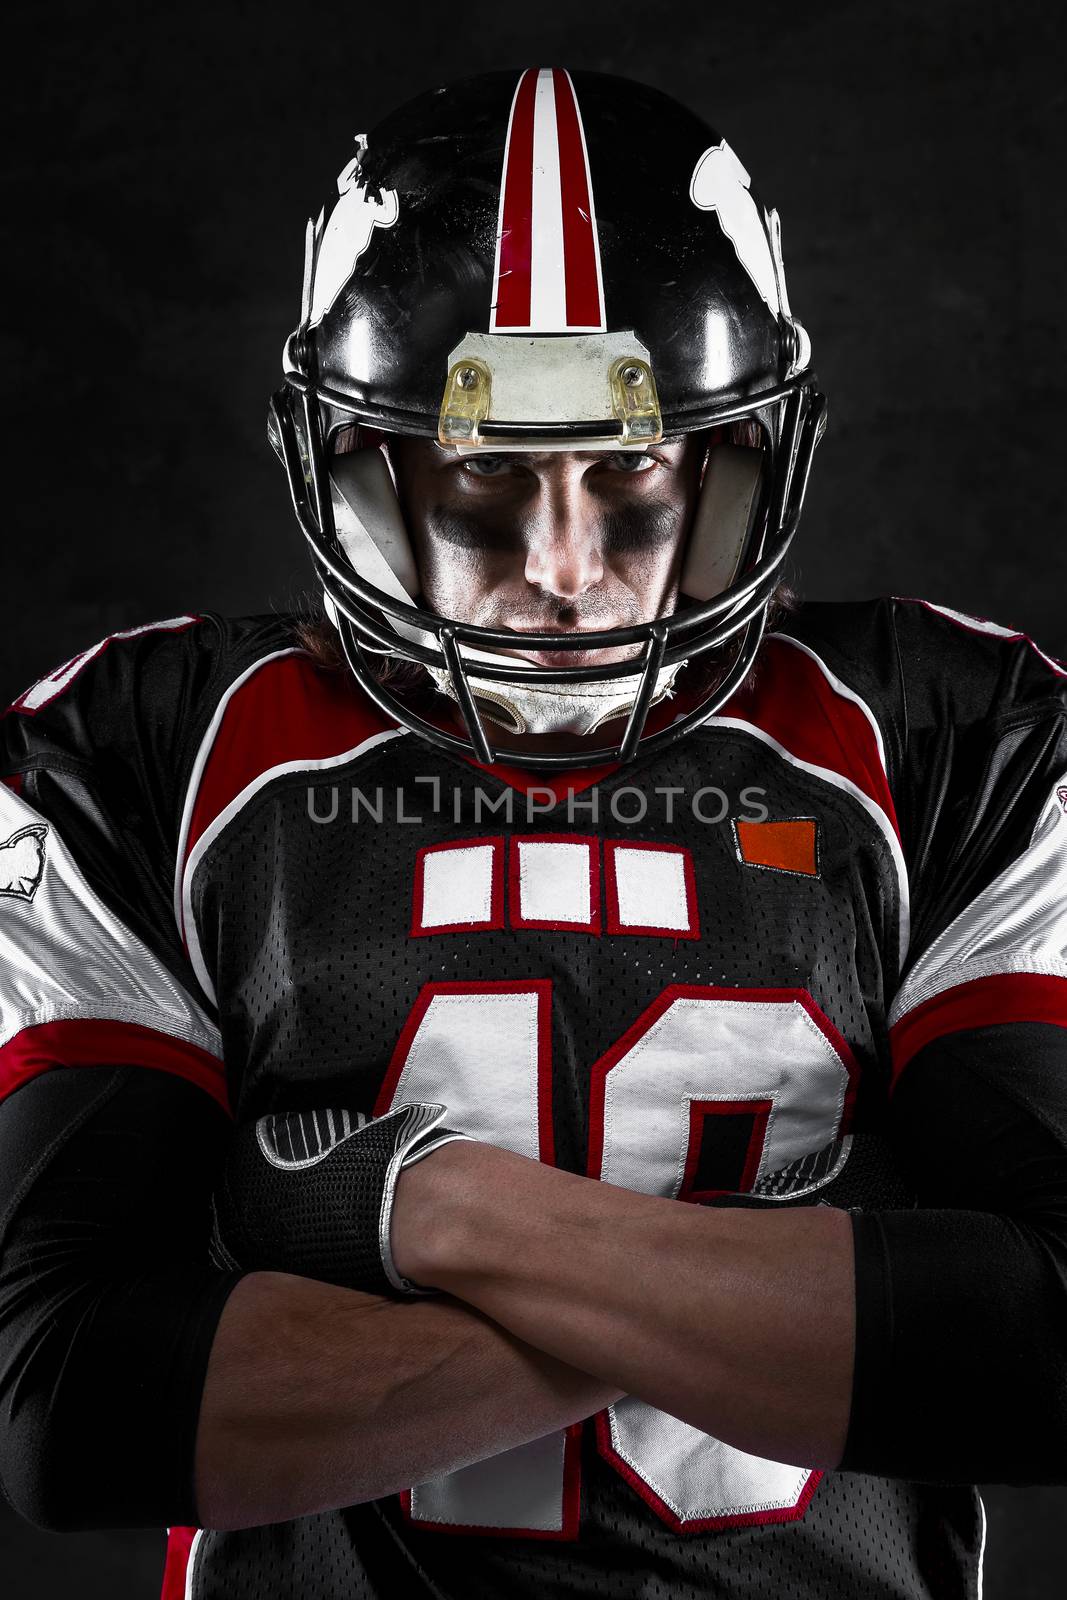 american football player with intense gaze by alessandroguerriero